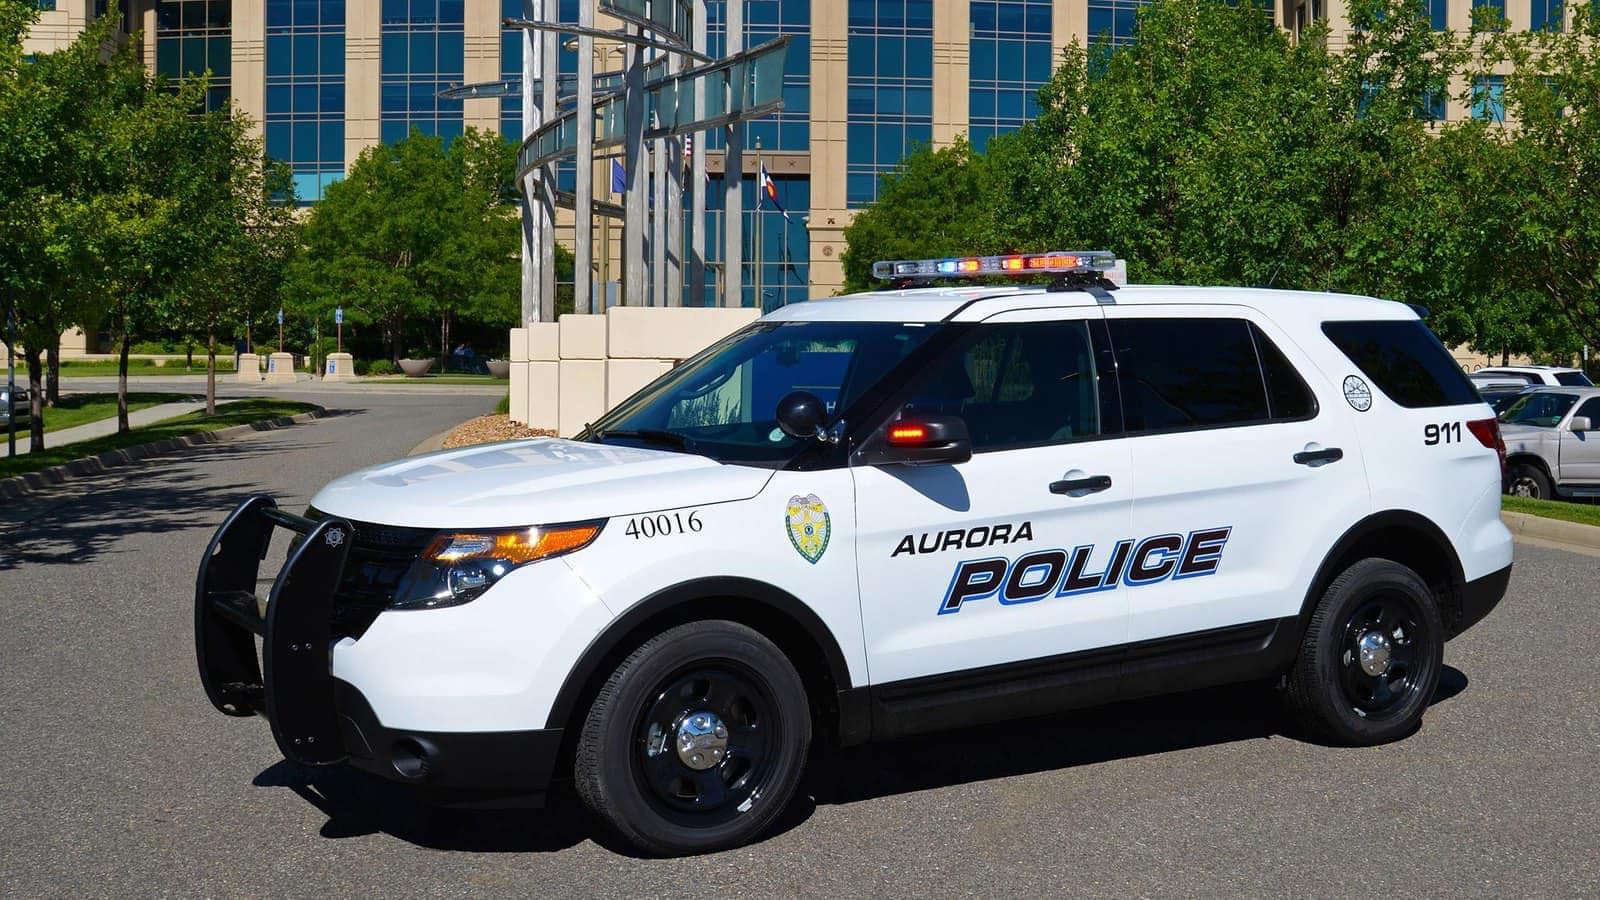 Aurora Police car outside during the day